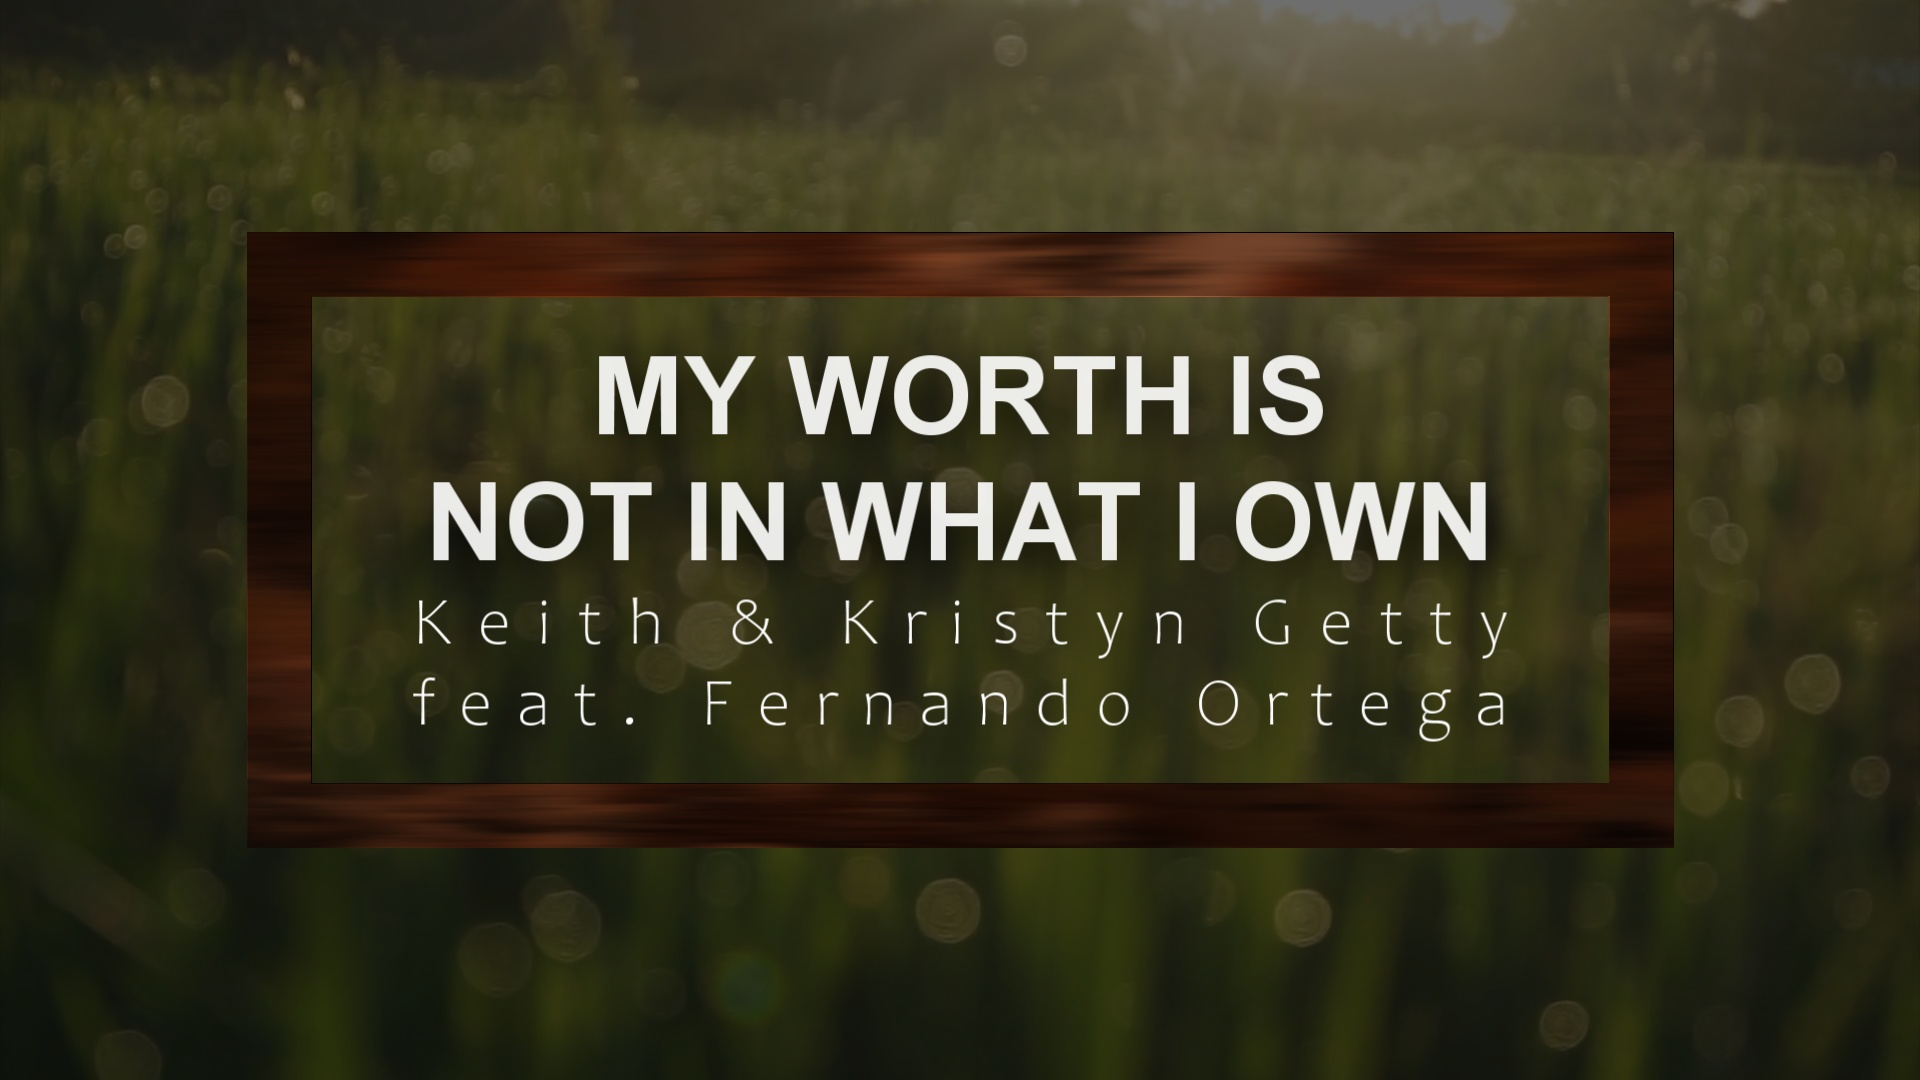 My worth is not in what I own